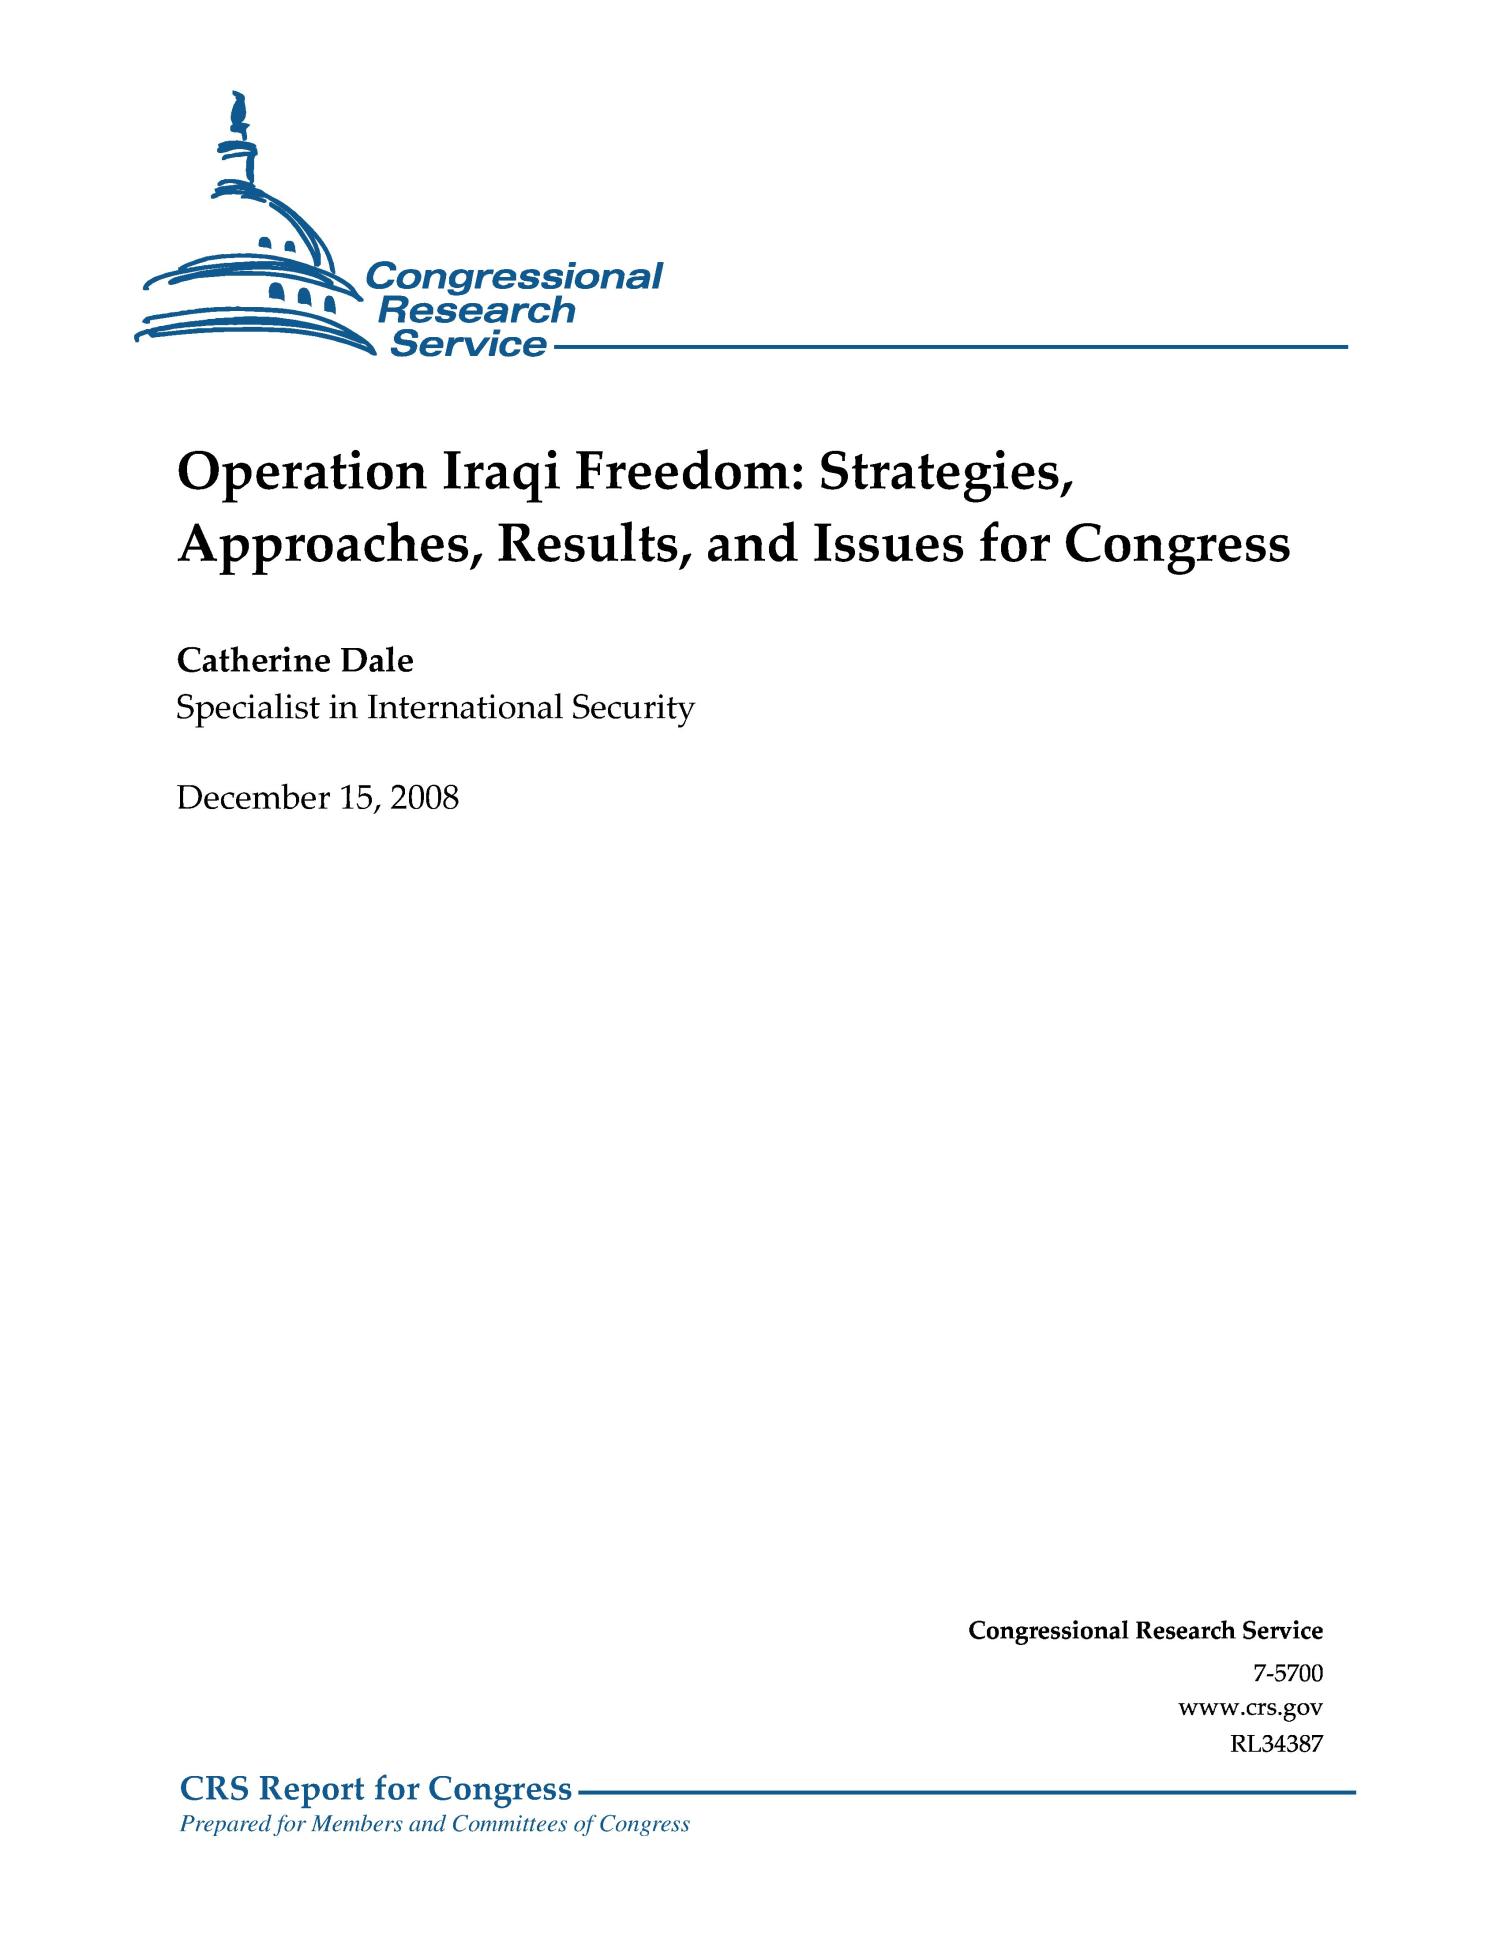 operation iraqi freedom research paper